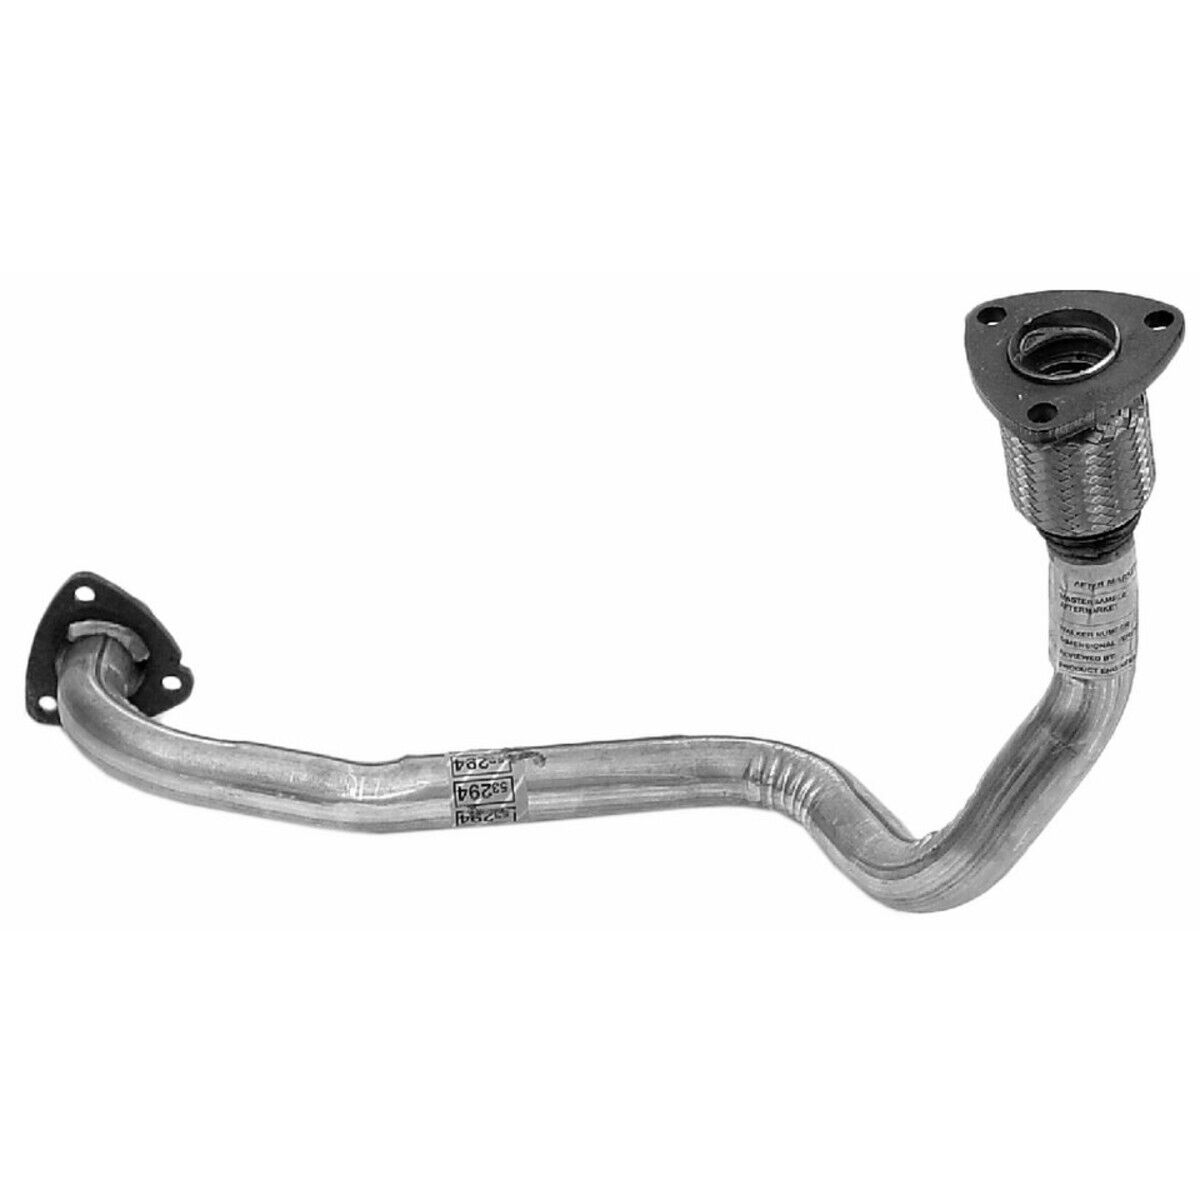 53294 Walker Exhaust Pipe for Chevy S10 Pickup Chevrolet S-10 GMC Sonoma Hombre